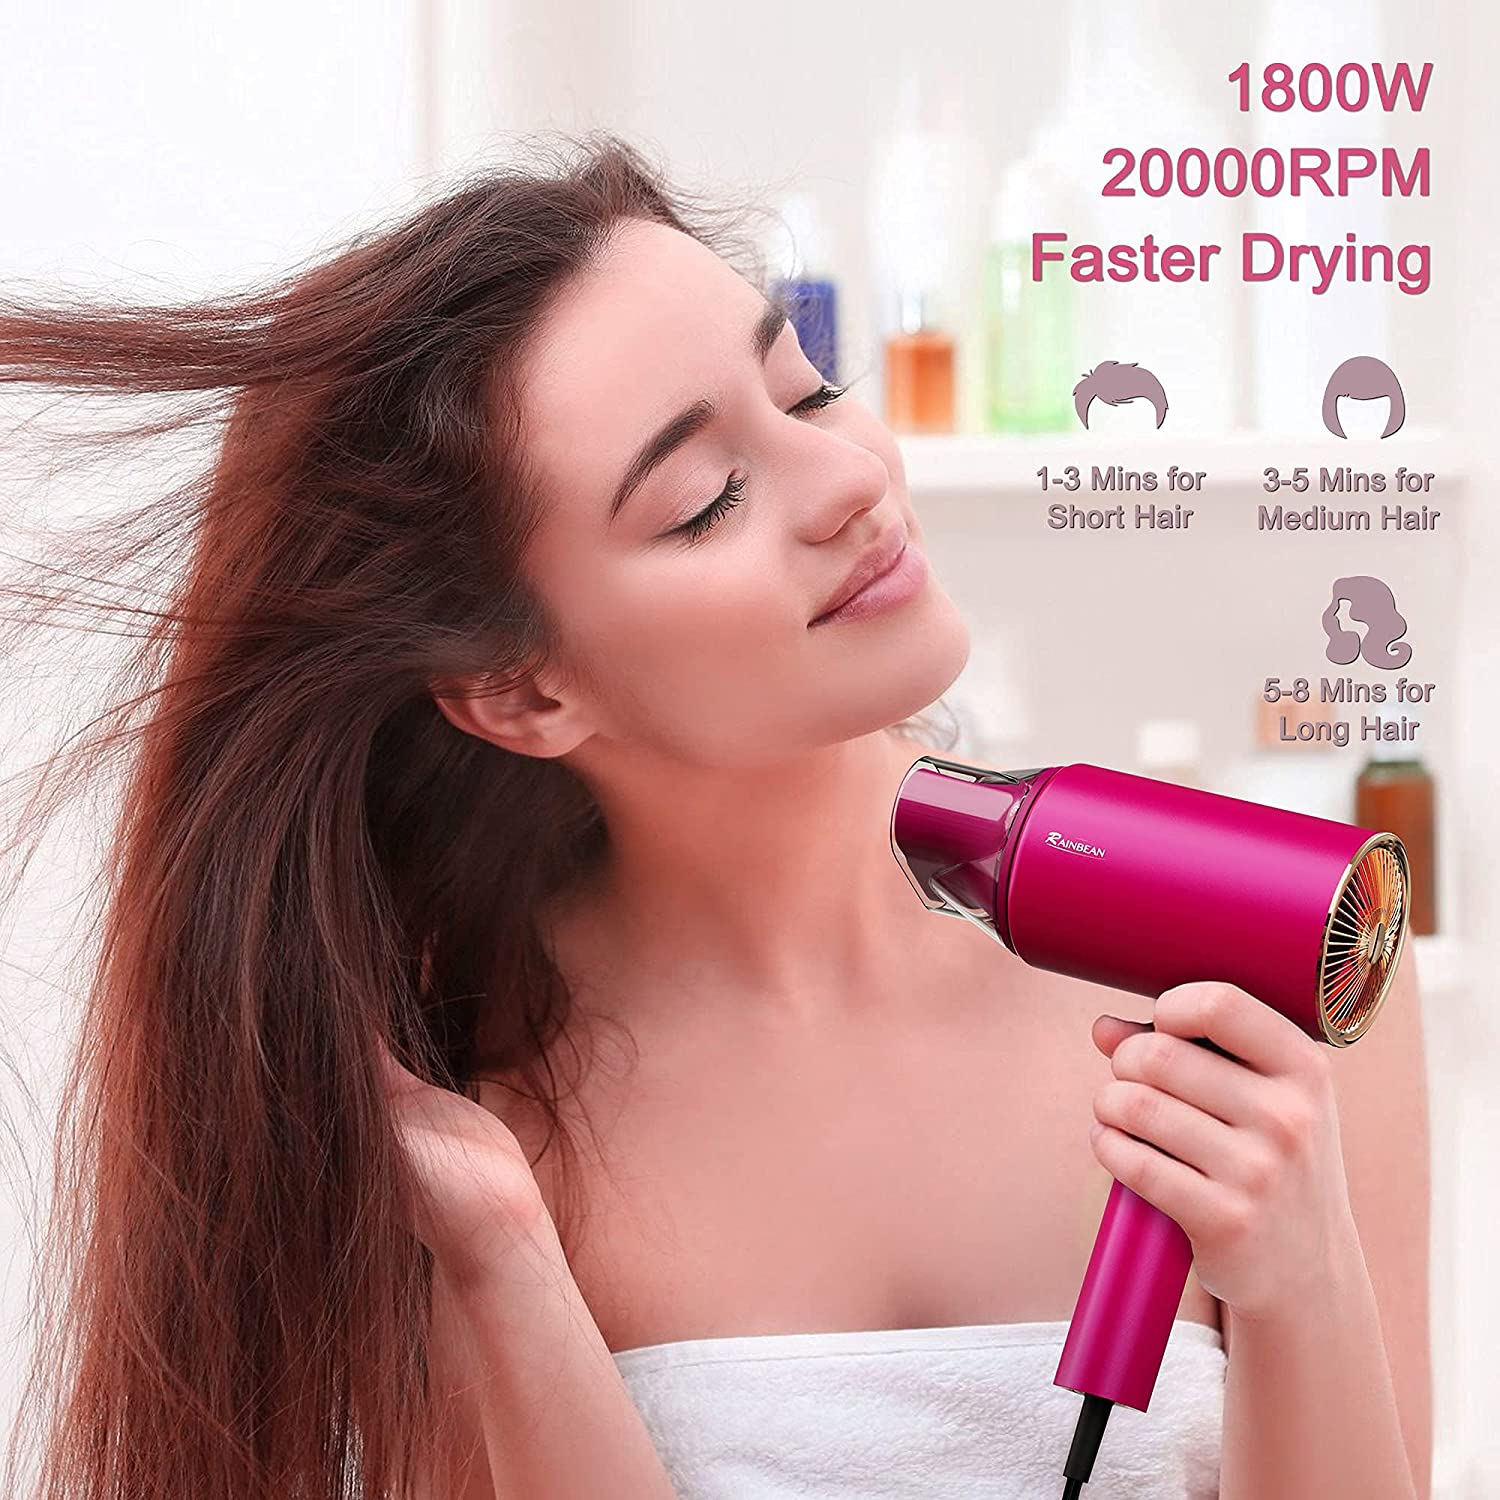 Water Ionic Hair Dryer, 1800W Blow Dryer With Magnetic Nozzle 2 Speed And 3 Heat Settings Powerful Low Noise Fast Drying Travel Hair Dryer For Home Travel-Masscheap